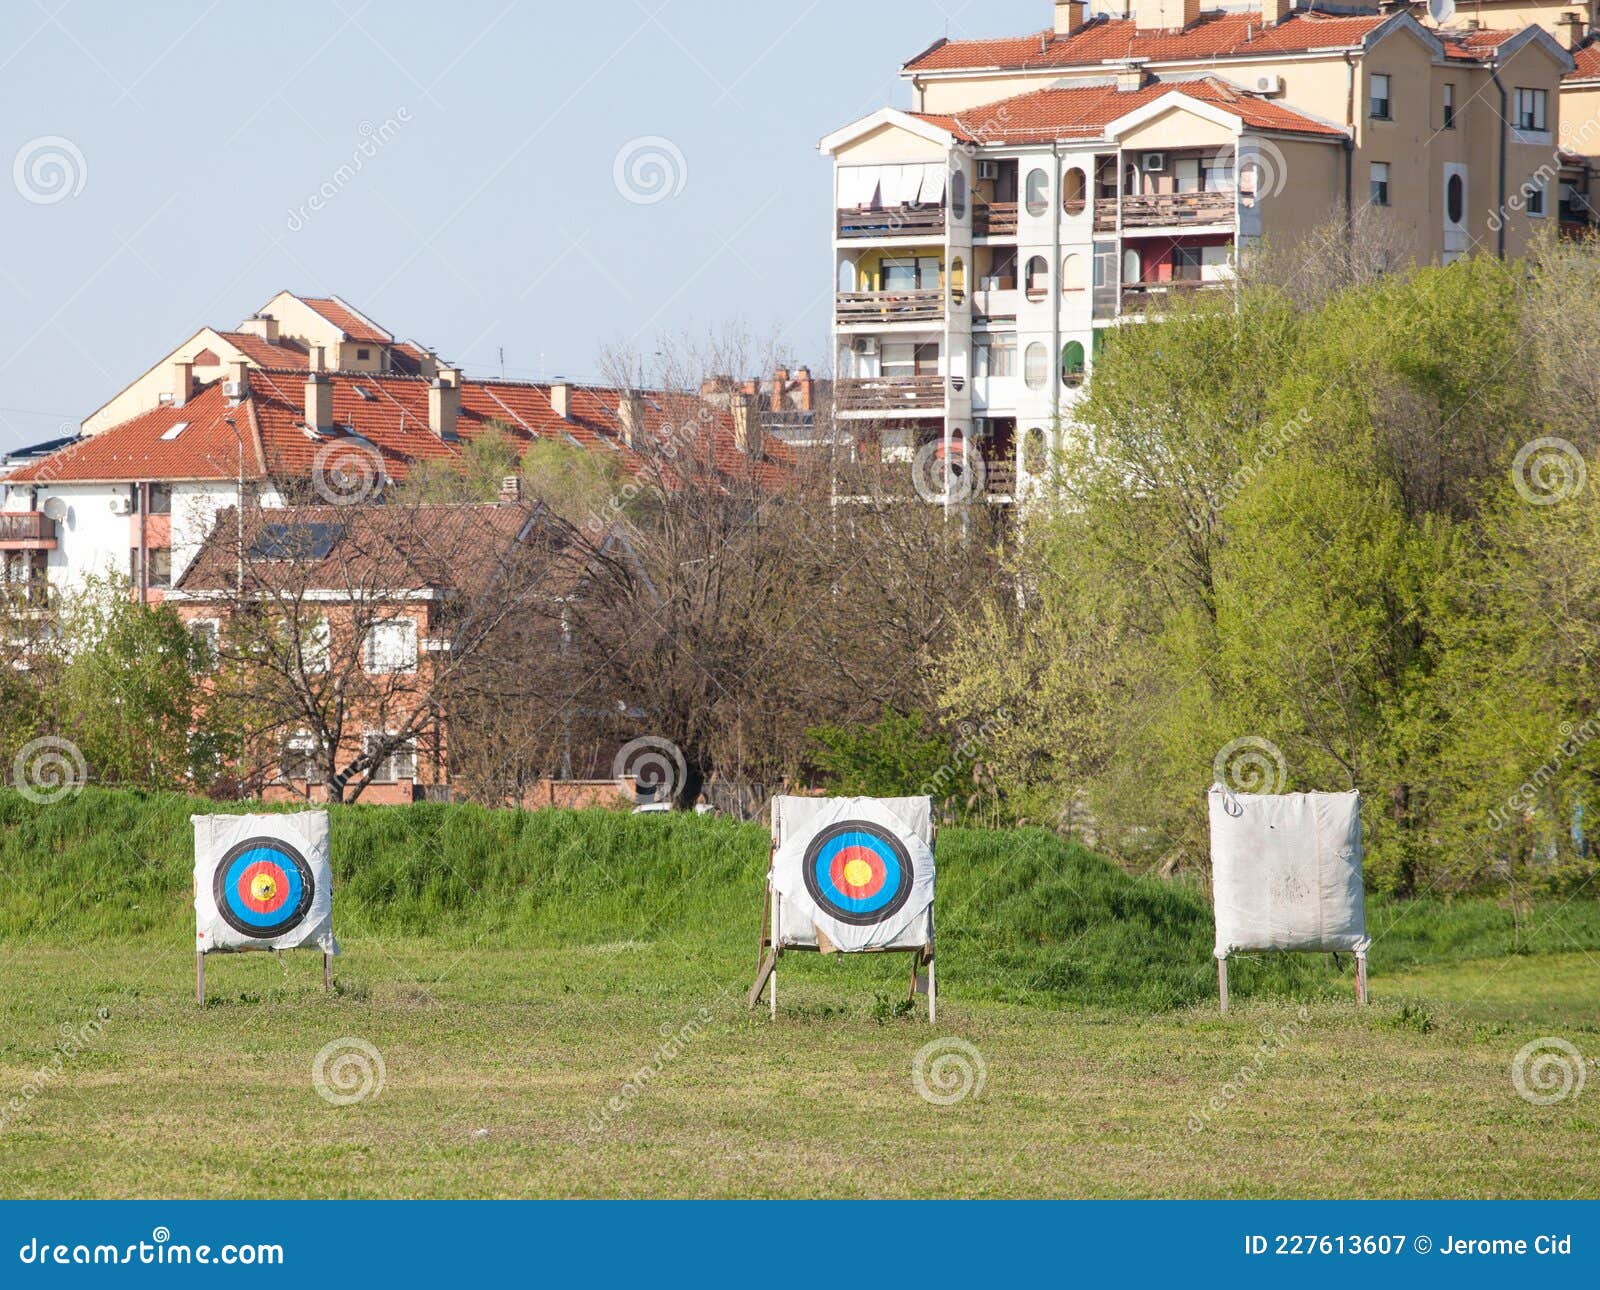 archery target, also called bullseye target, in an archers field, used for practicing archery, outdoors